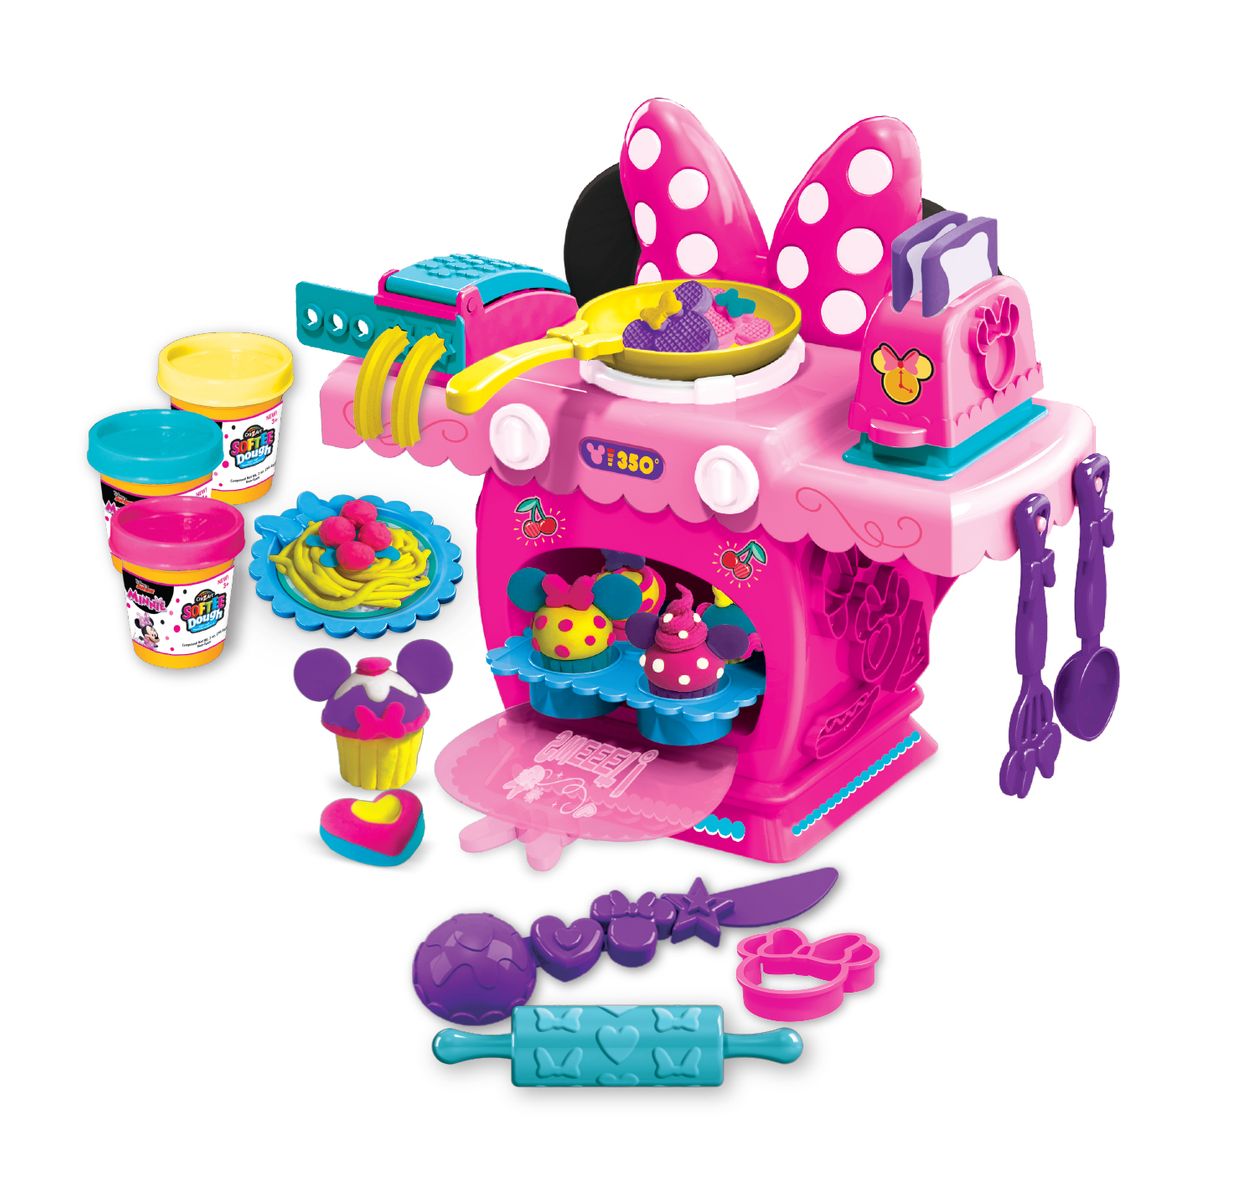   Cra-Z-Art Softee Dough ディズニージュニア ミニーマウス デラックスキッチンプレイセット  | Cra-Z-Art Softee Dough Disney Junior Minnie Mouse Deluxe Kitchen Play Set